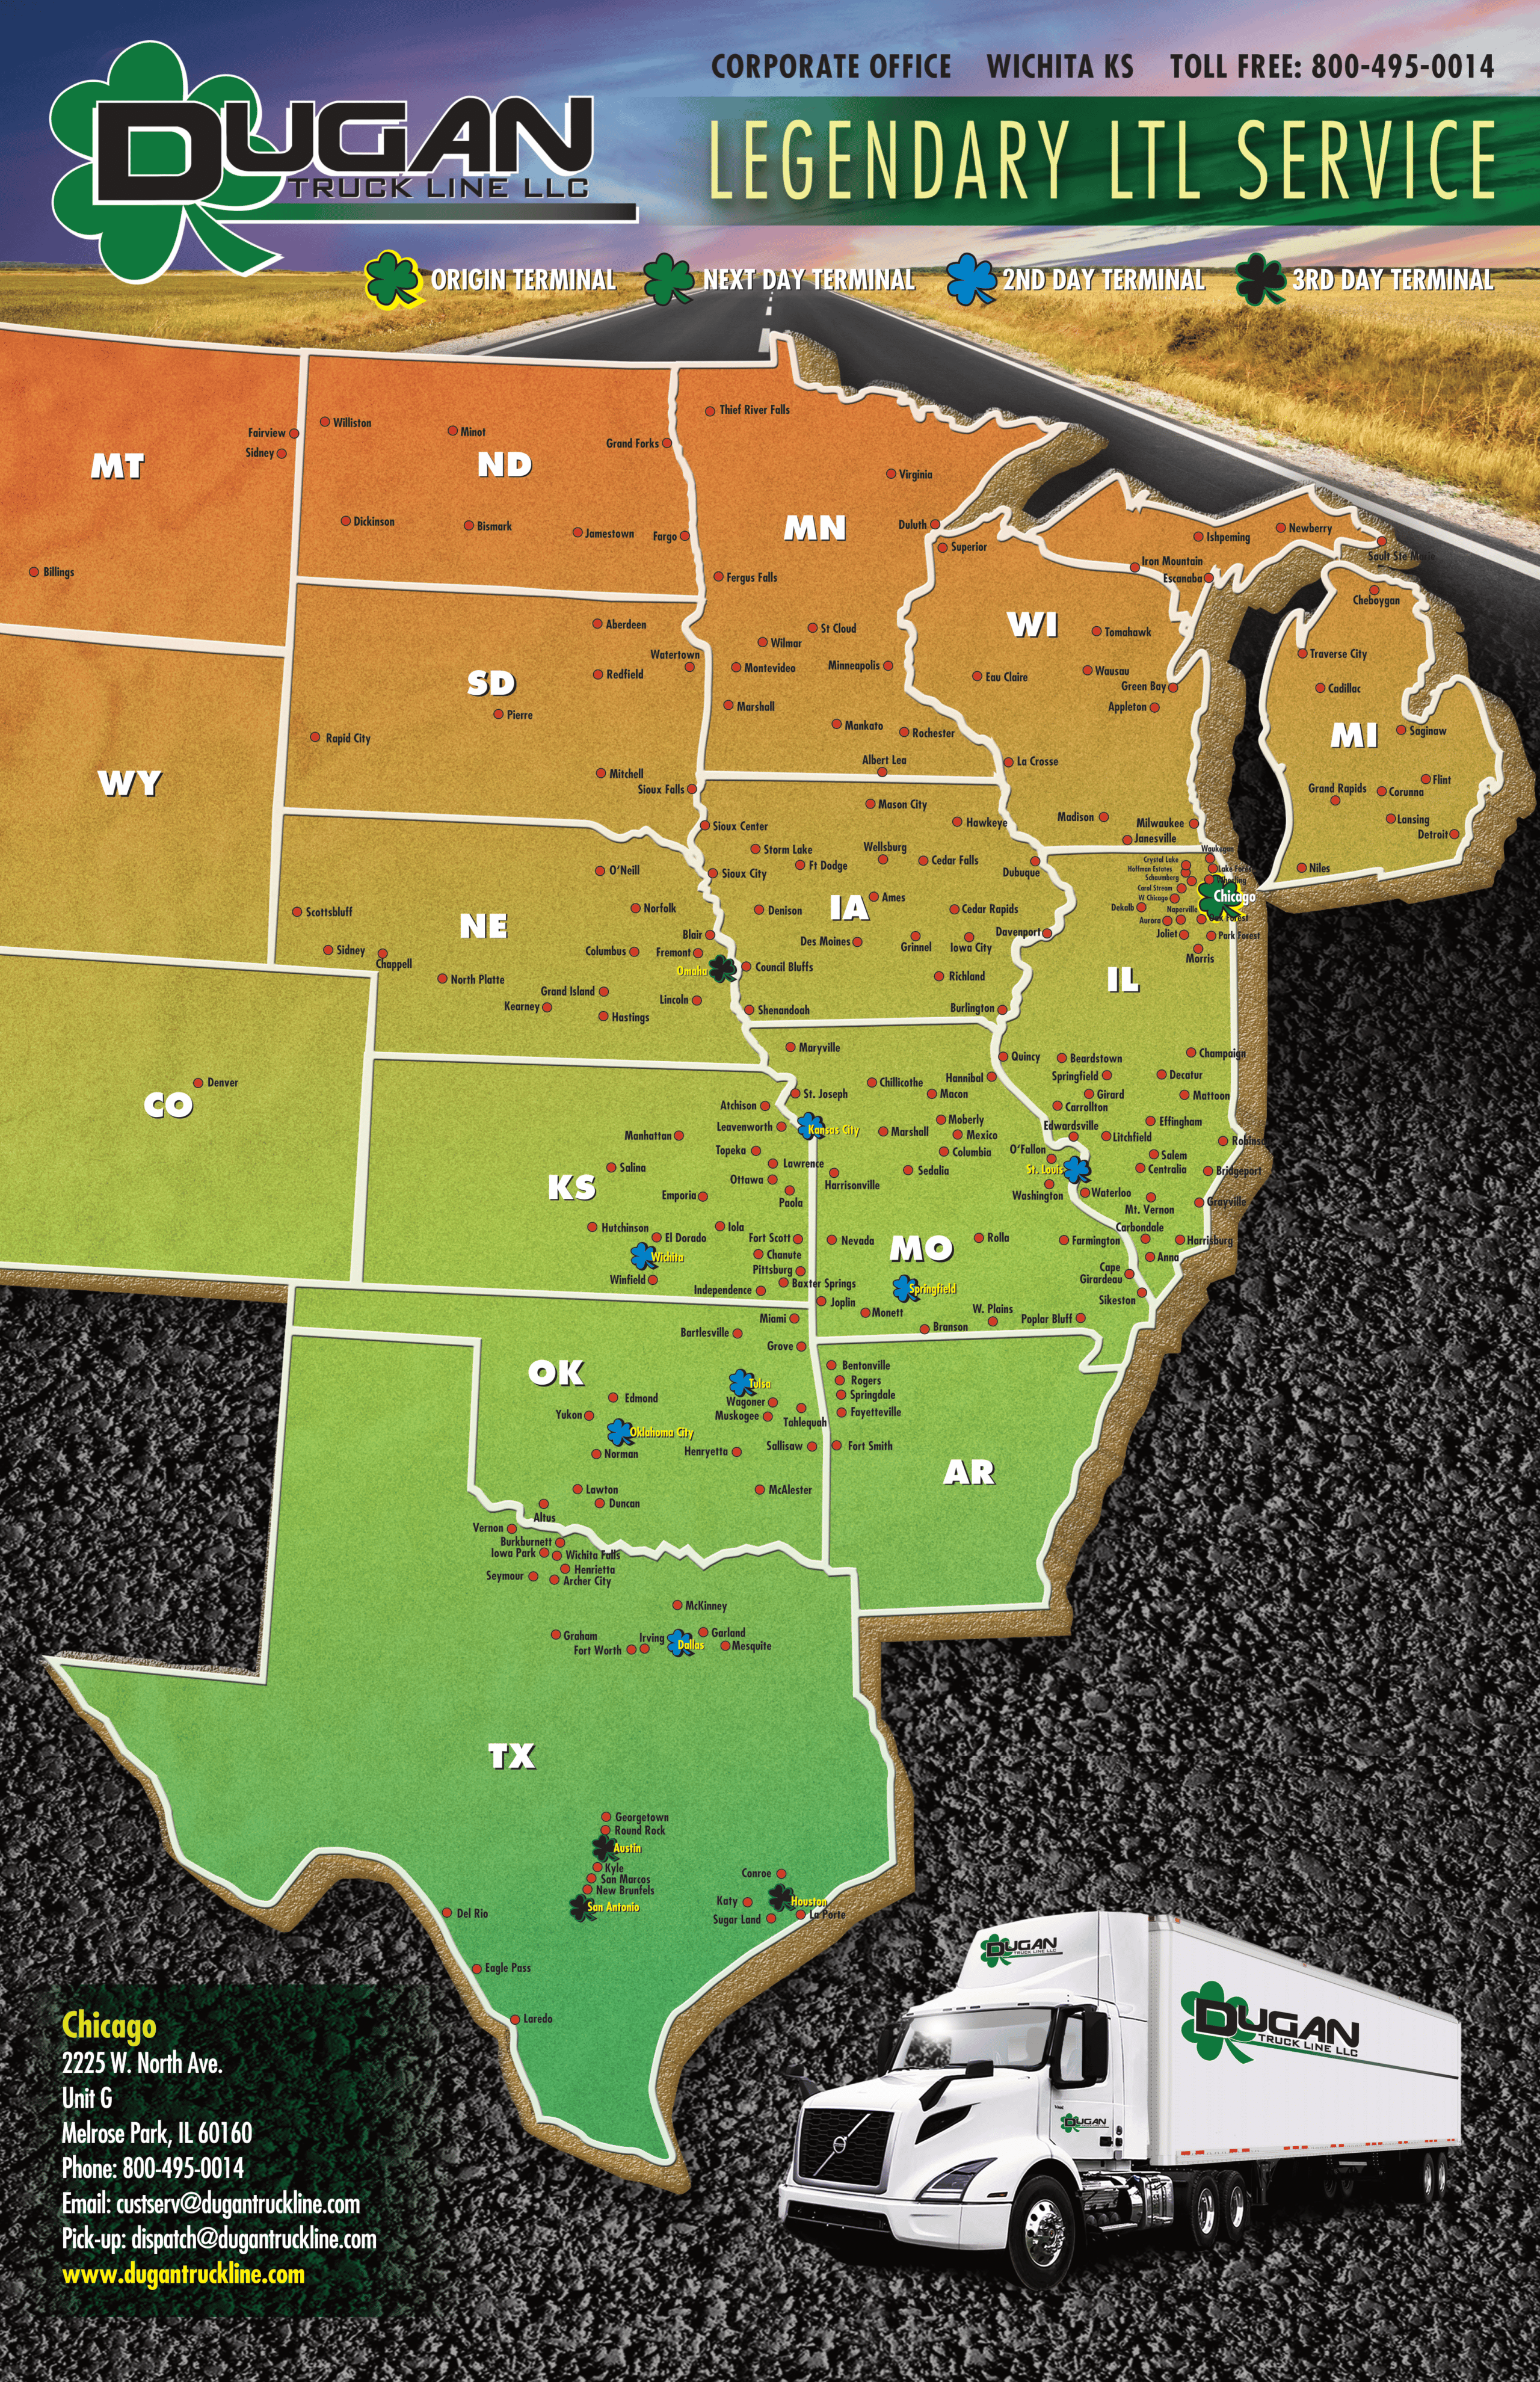 Dugan Maps Chicago - Chicago LTL Service Map - LTL Overnight Freight Shipping Services | Dugan Truck Line